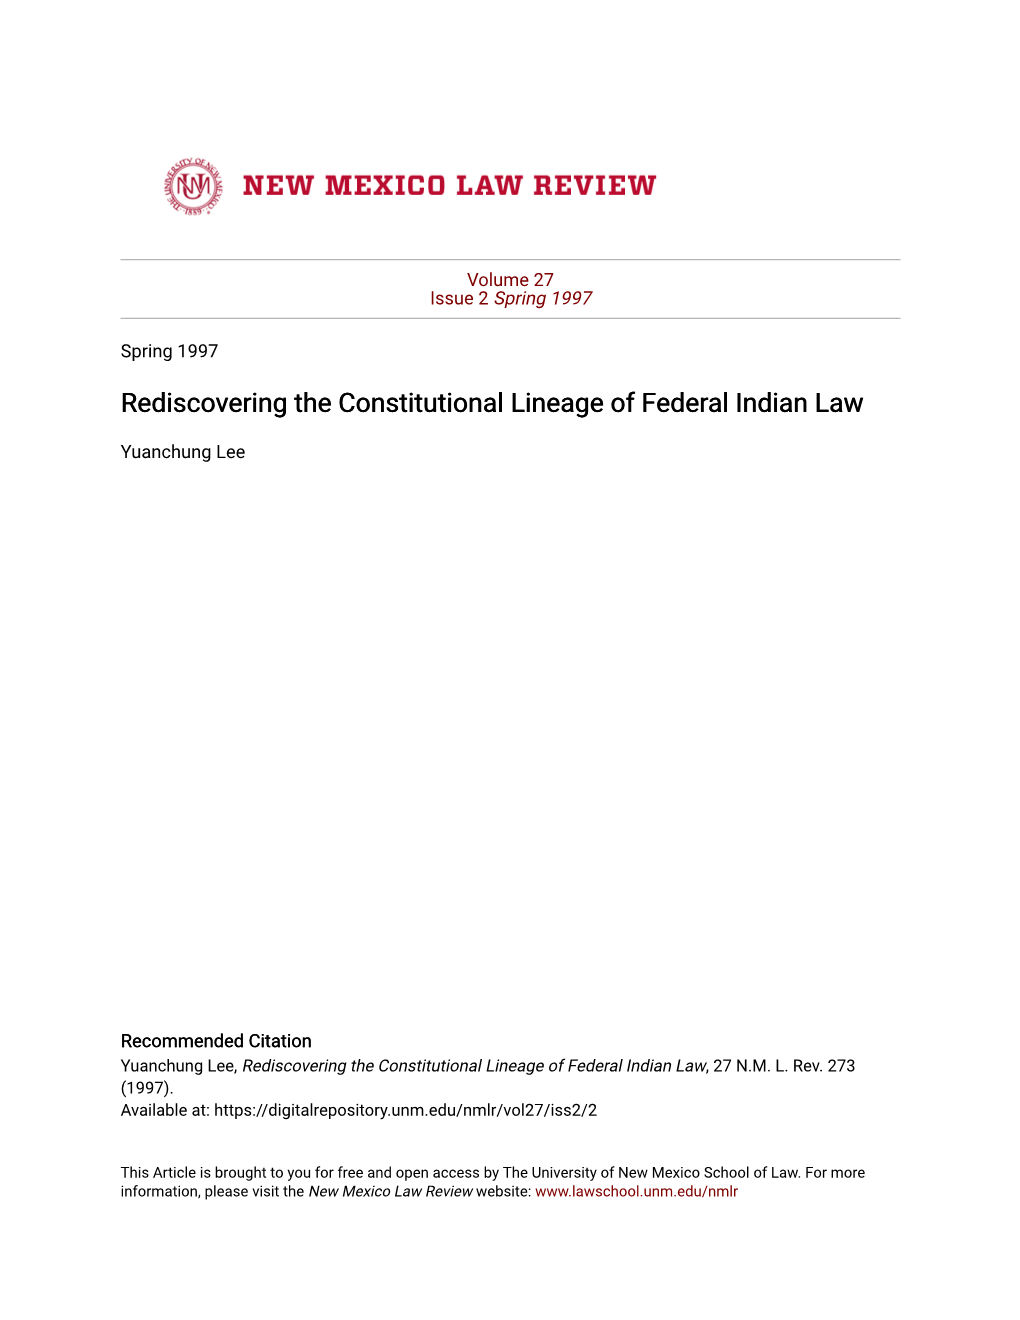 Rediscovering the Constitutional Lineage of Federal Indian Law